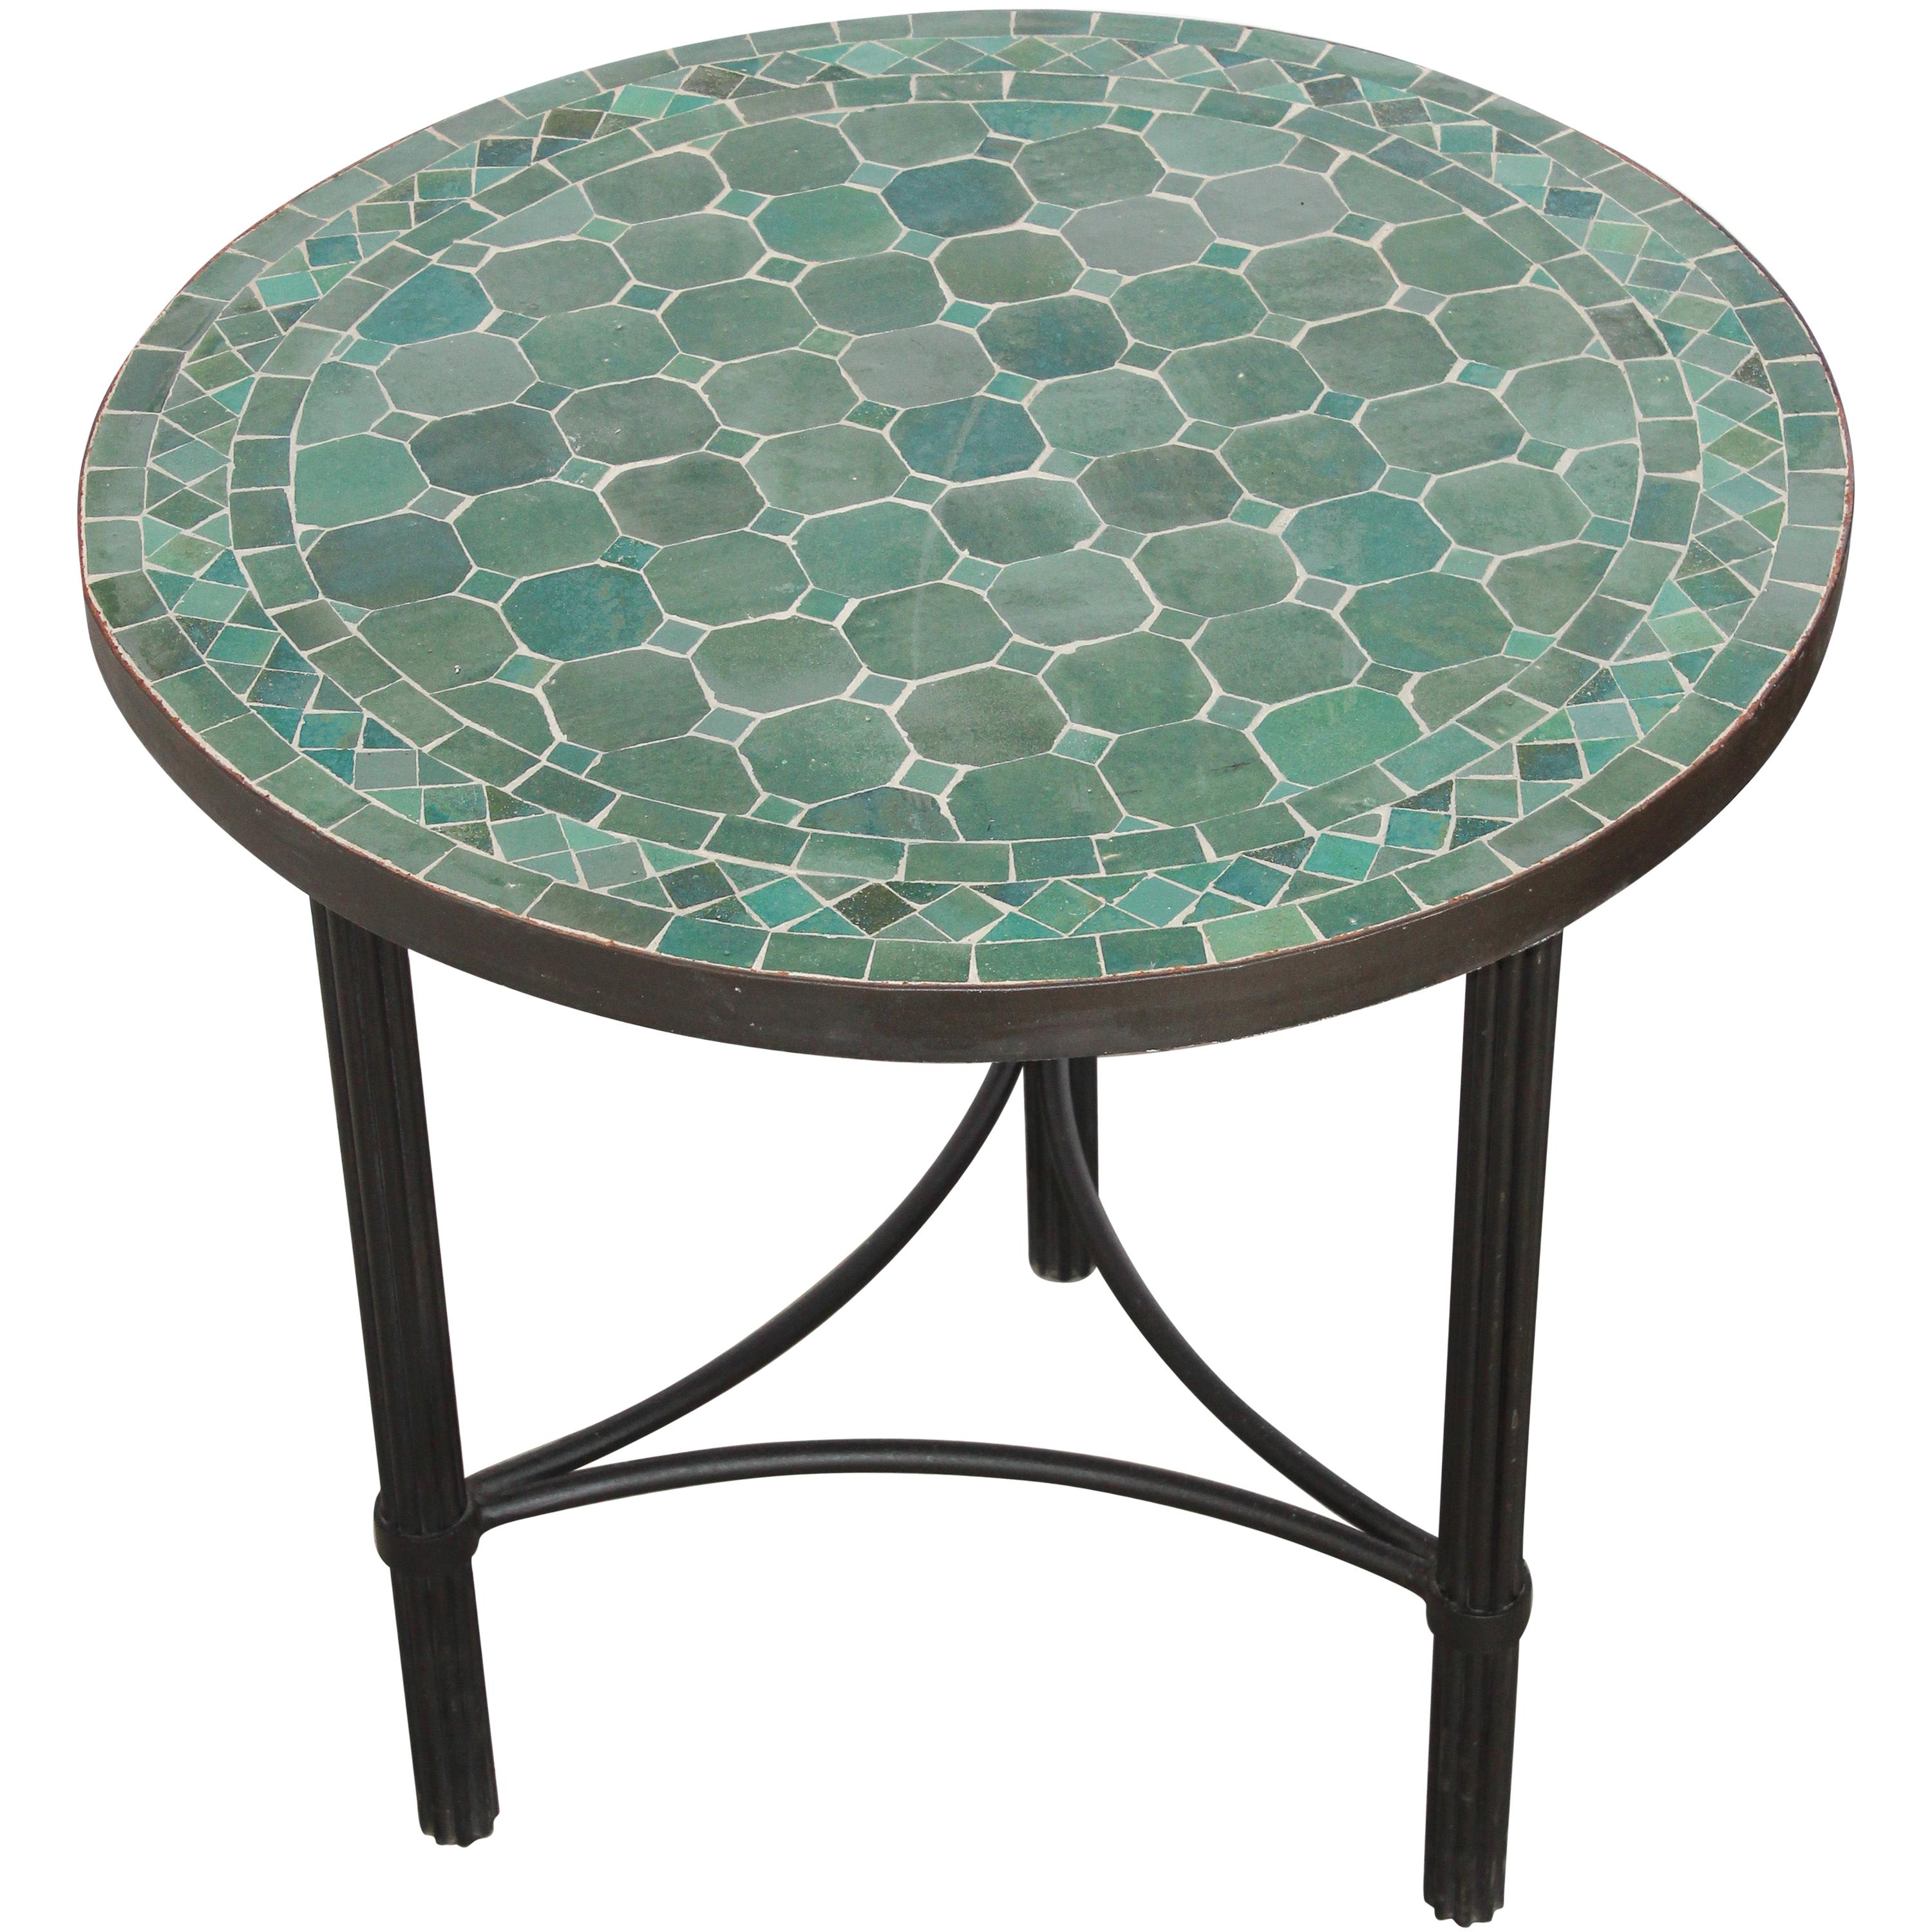 Moroccan Mosaic Fez Tiles Green Colors Side Table